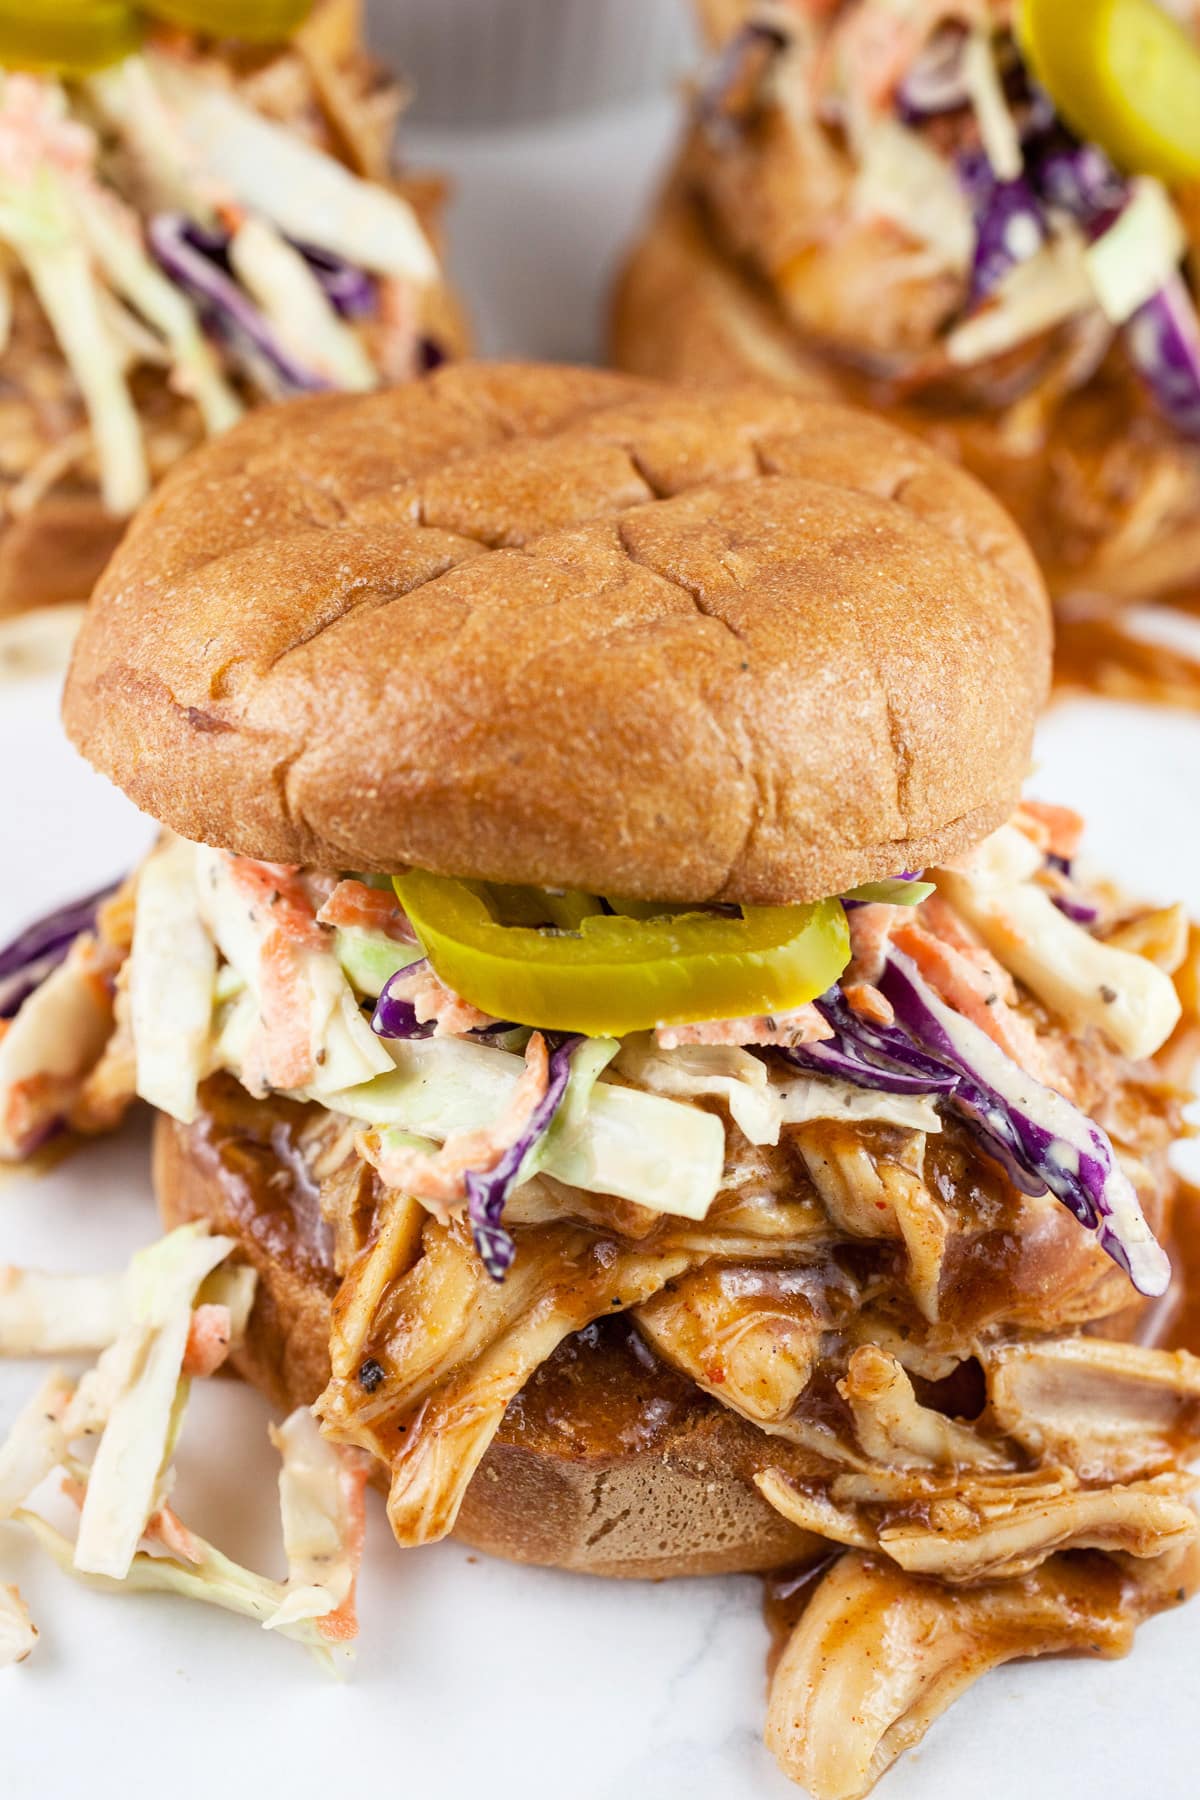 Pulled BBQ chicken sandwiches with coleslaw and pickled jalapenos on toasted buns.